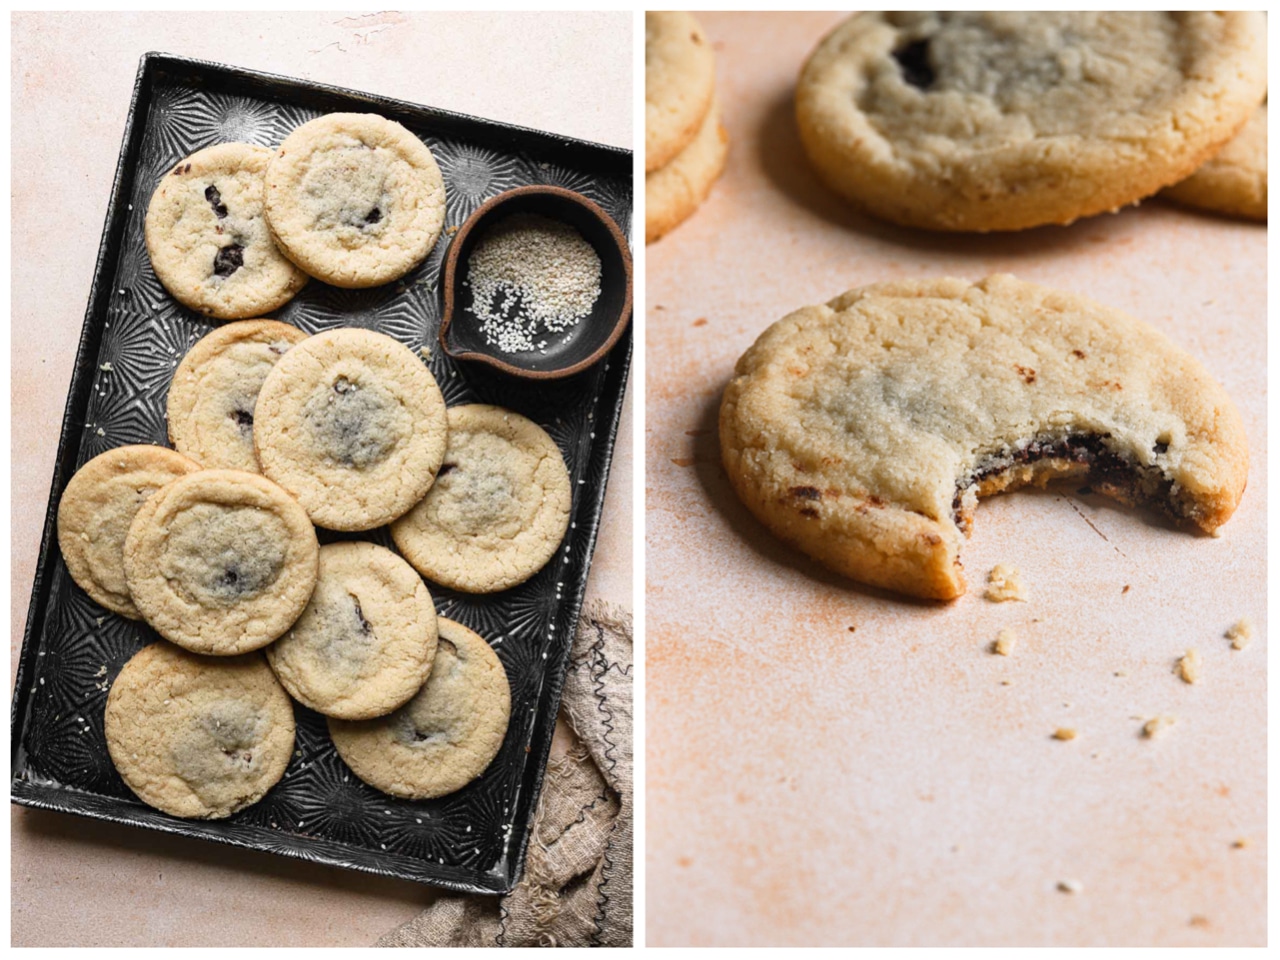 A side-by-side photo. On the left, ten chocolate tahini cookies are presented on a black tray next to a small bowl filled with sesame seeds. On the right, a cookie with a bite taken out of it rests on a table. 